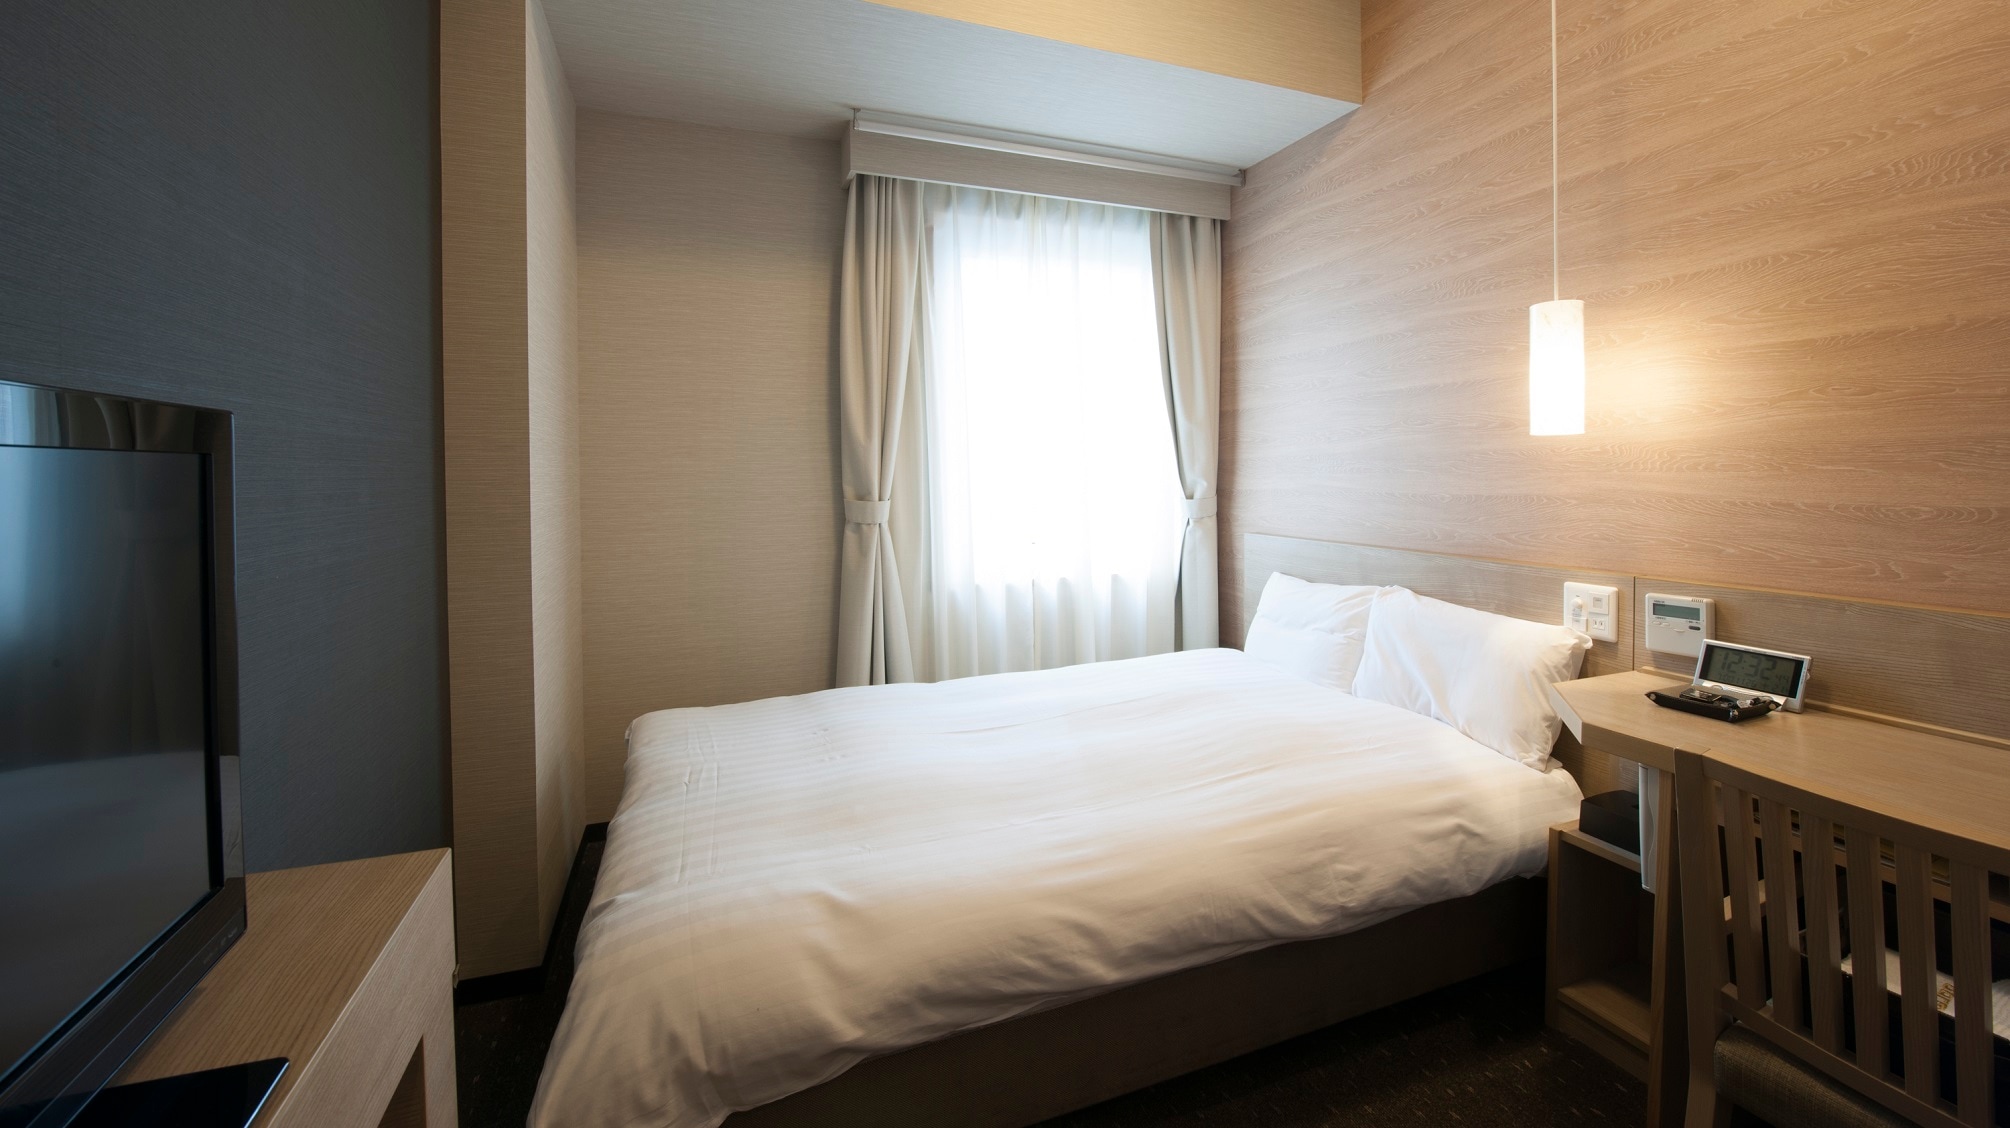 ◆ Economy Single Room 12.6㎡ ・ Bed width 120cm & times; 195cm & times; 1 bed ・ Simmons bed